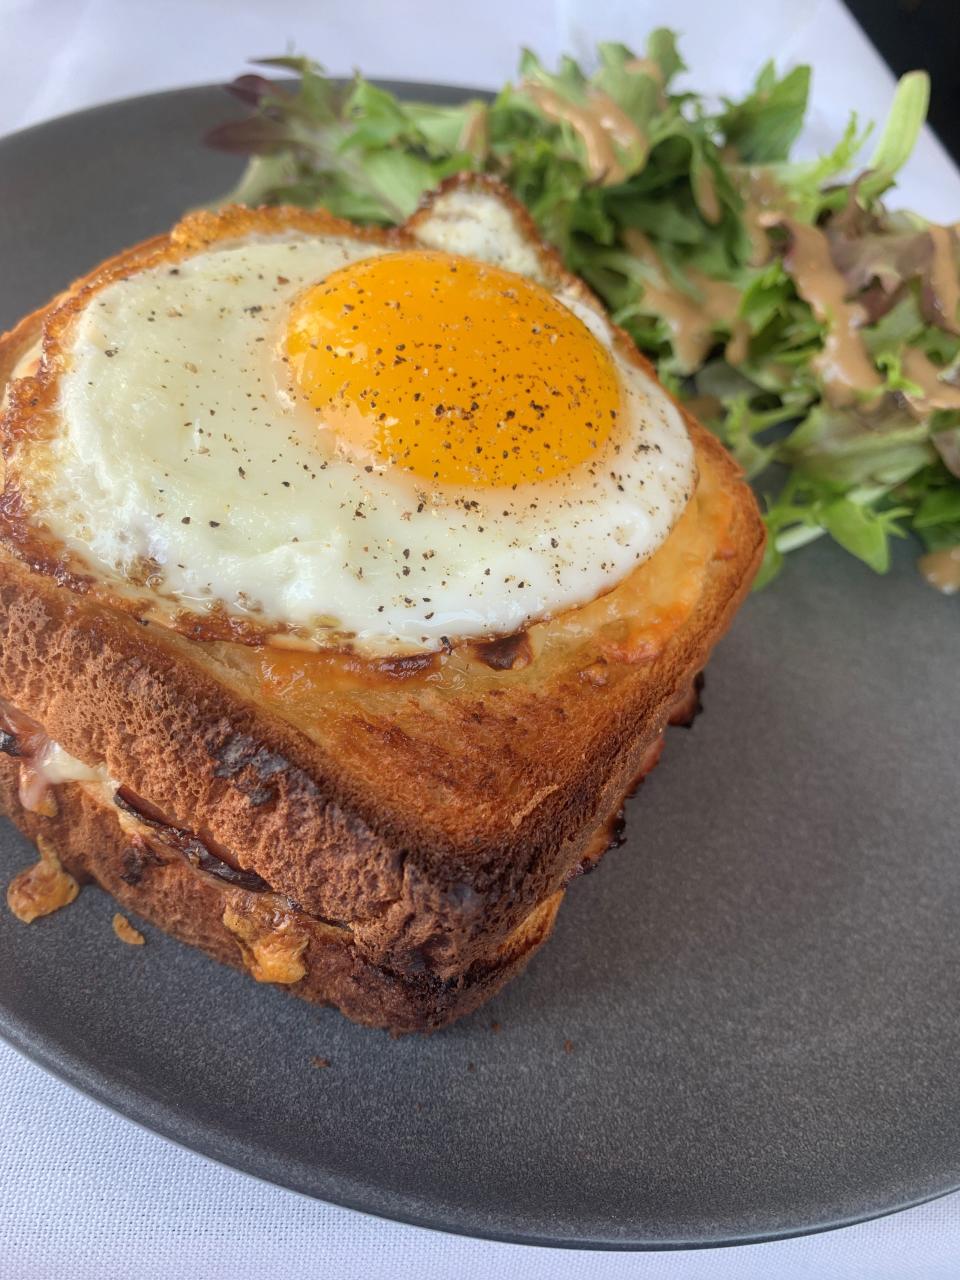 The Croque Madame at Le French Restaurant in Indian Harbour Beach adds a touch of sophistication to the average lunch hour.